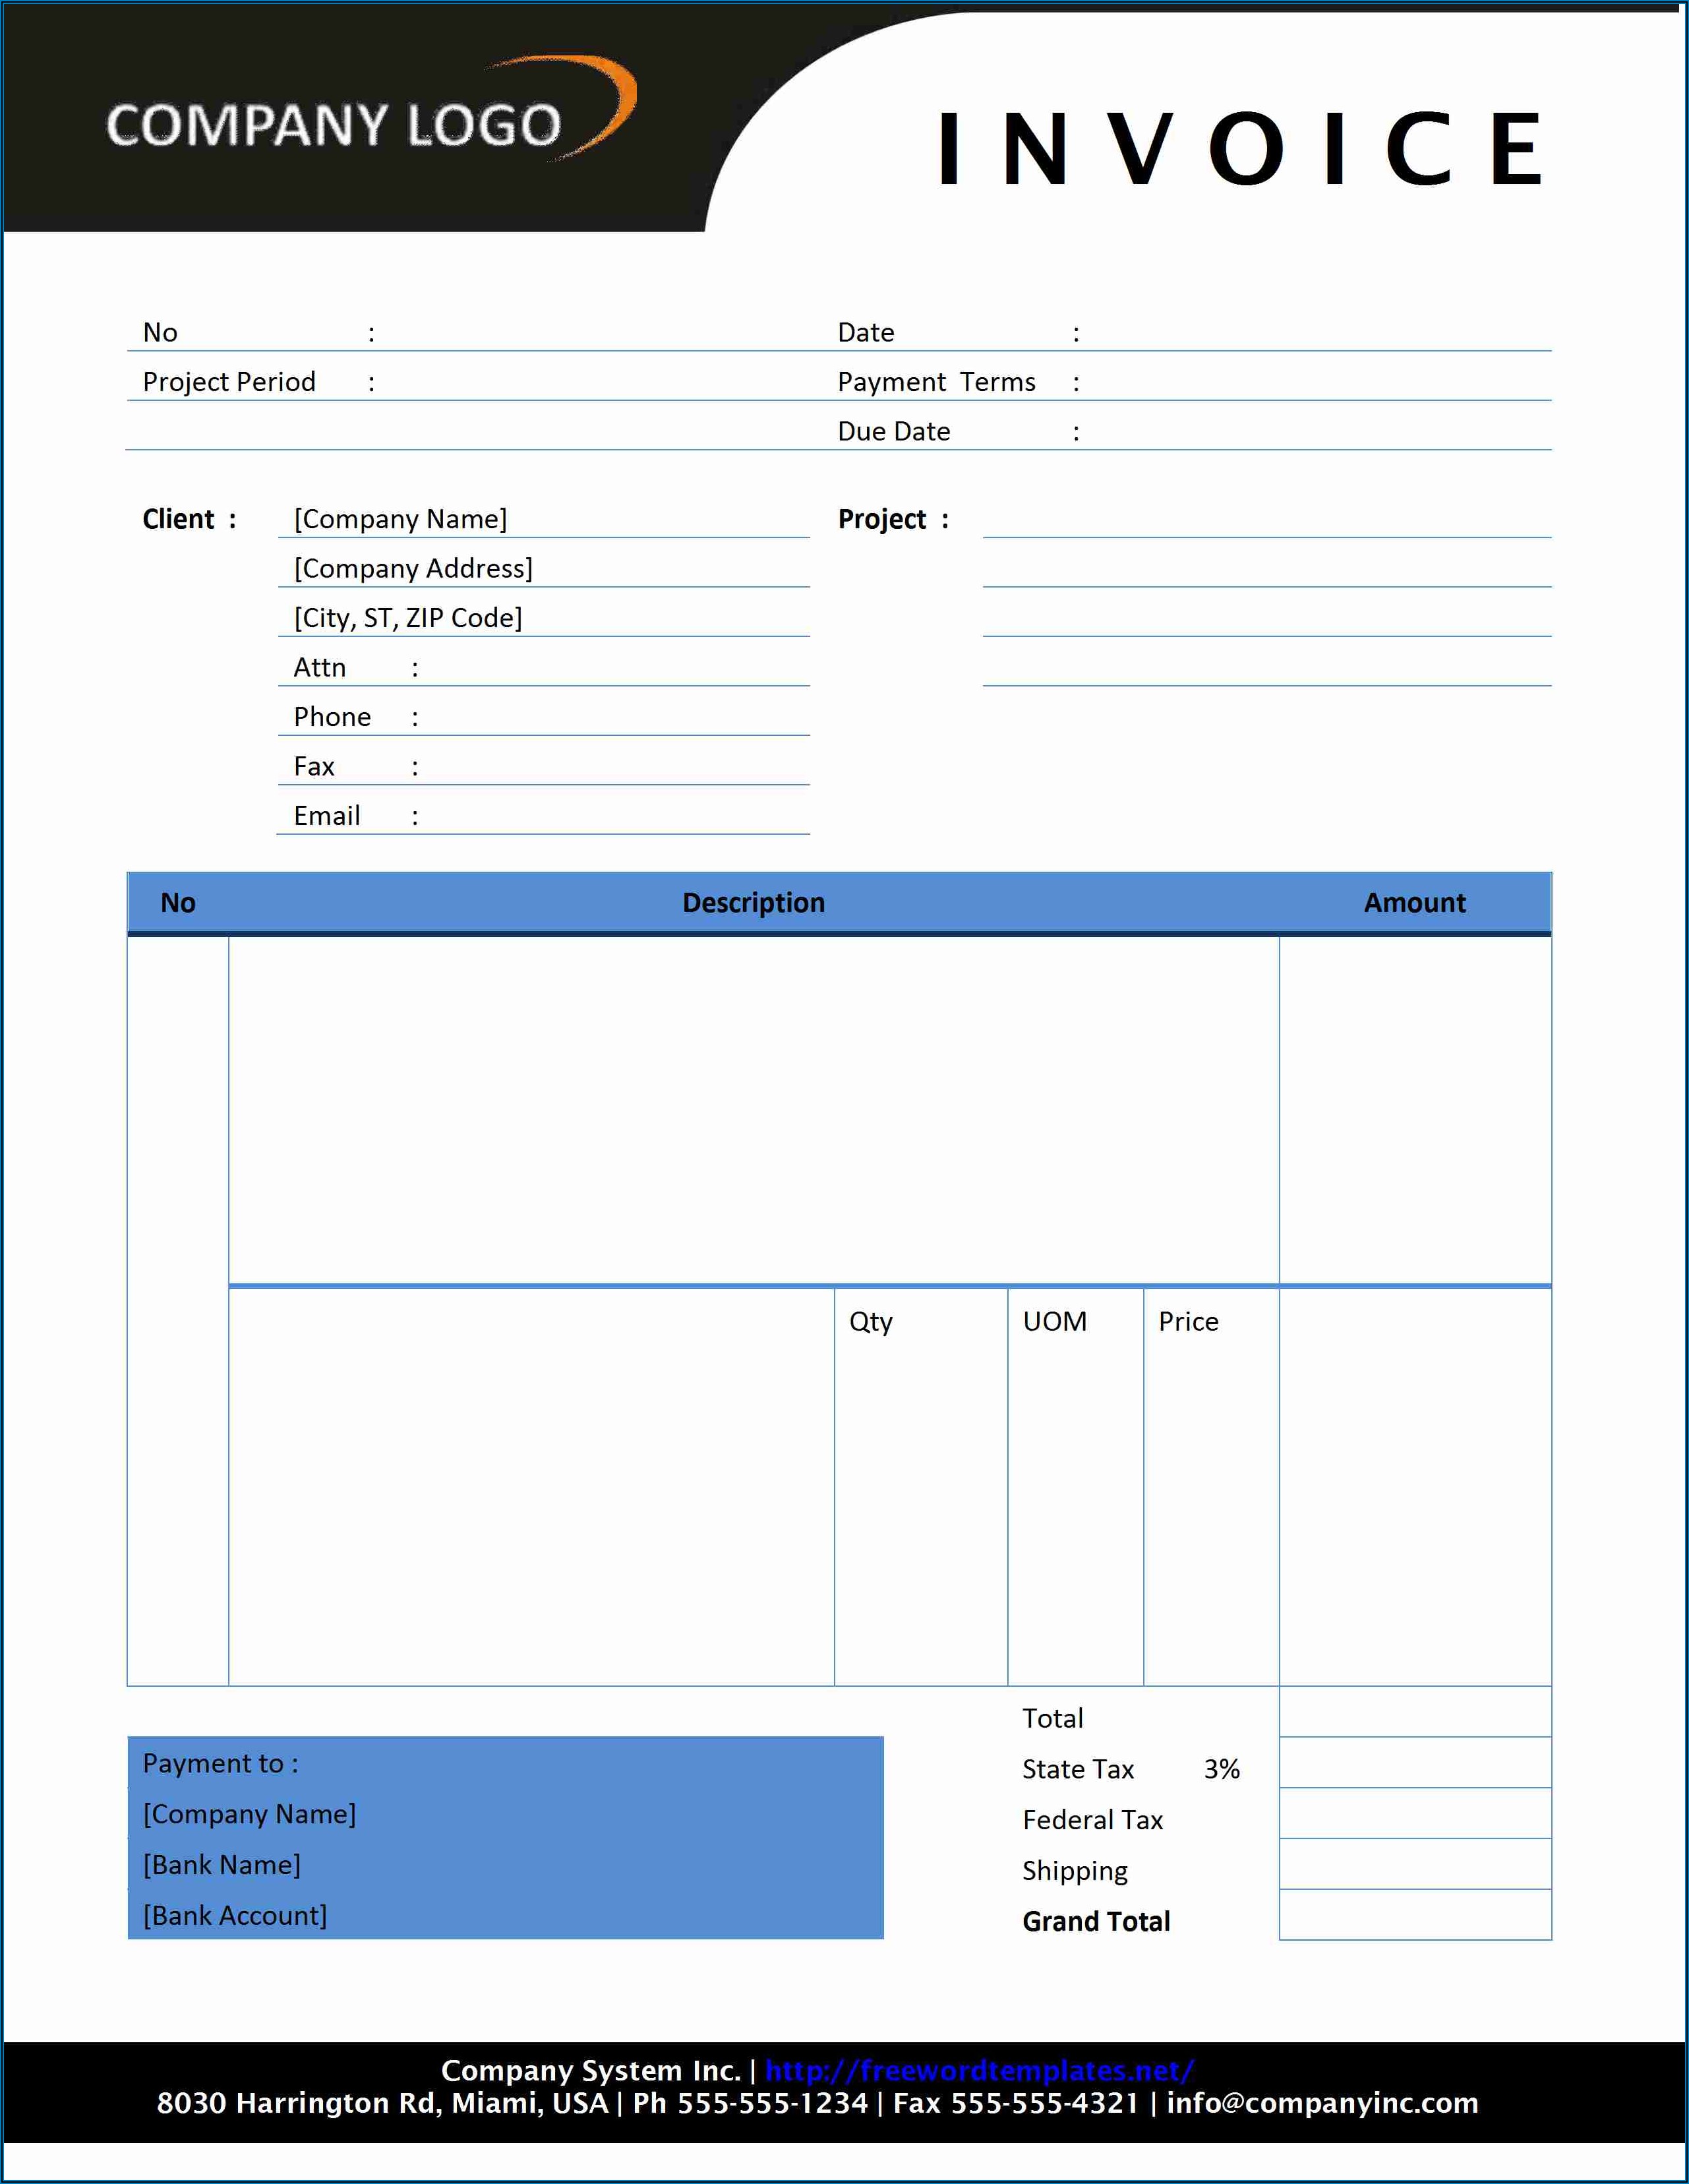 Invoice Format For Consulting Services